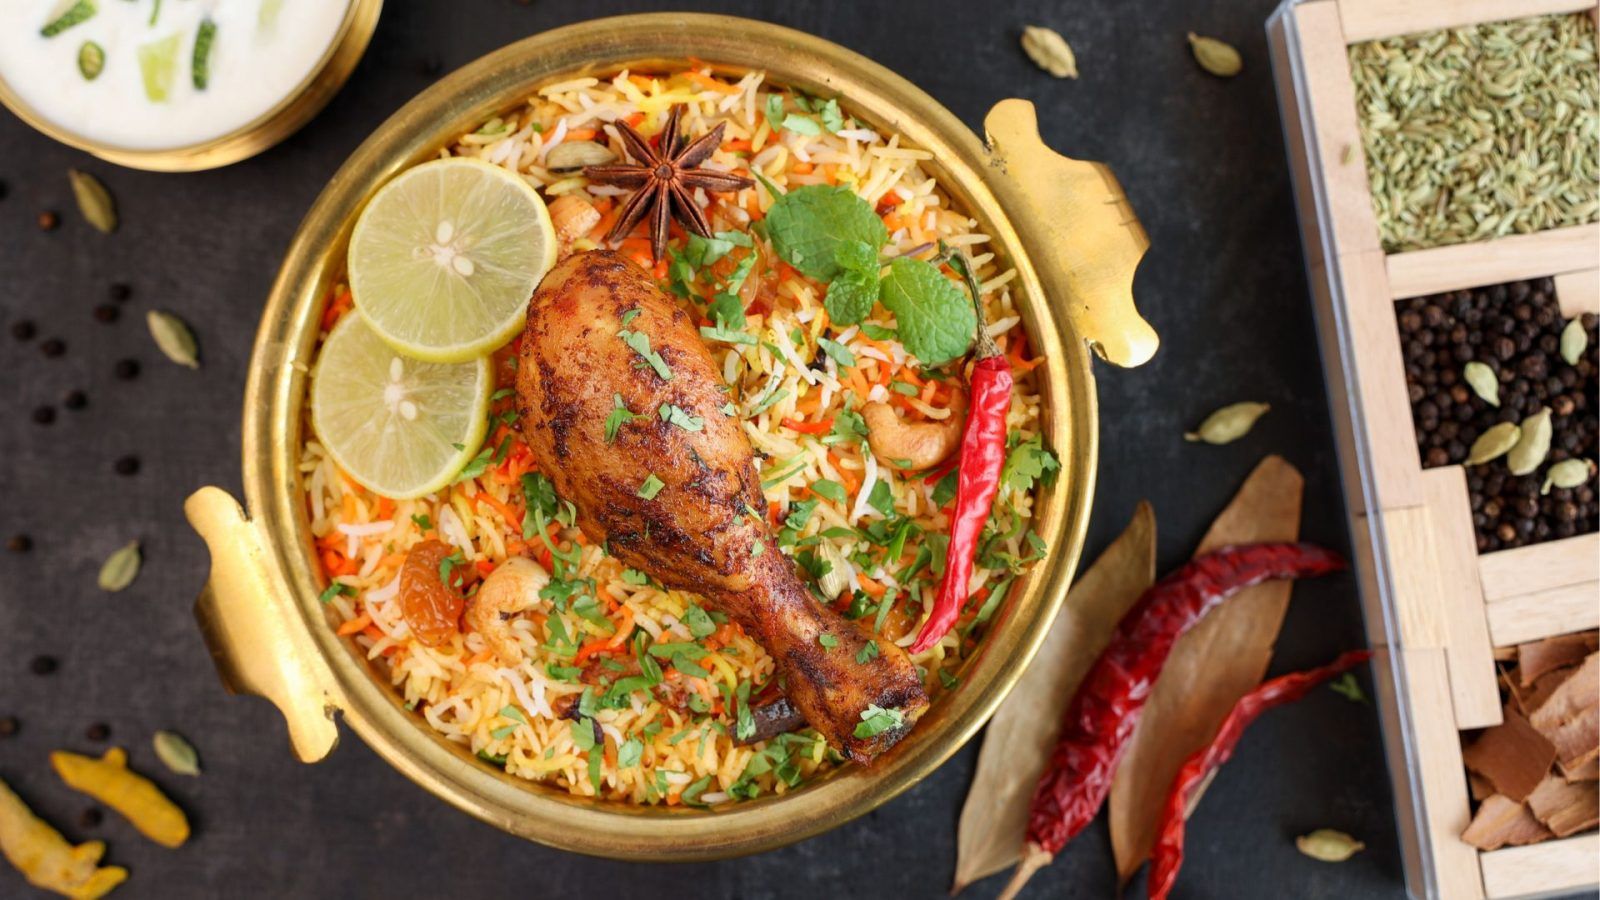 Dig into aromatic chicken biryani at these local-approved spots in Bangalore